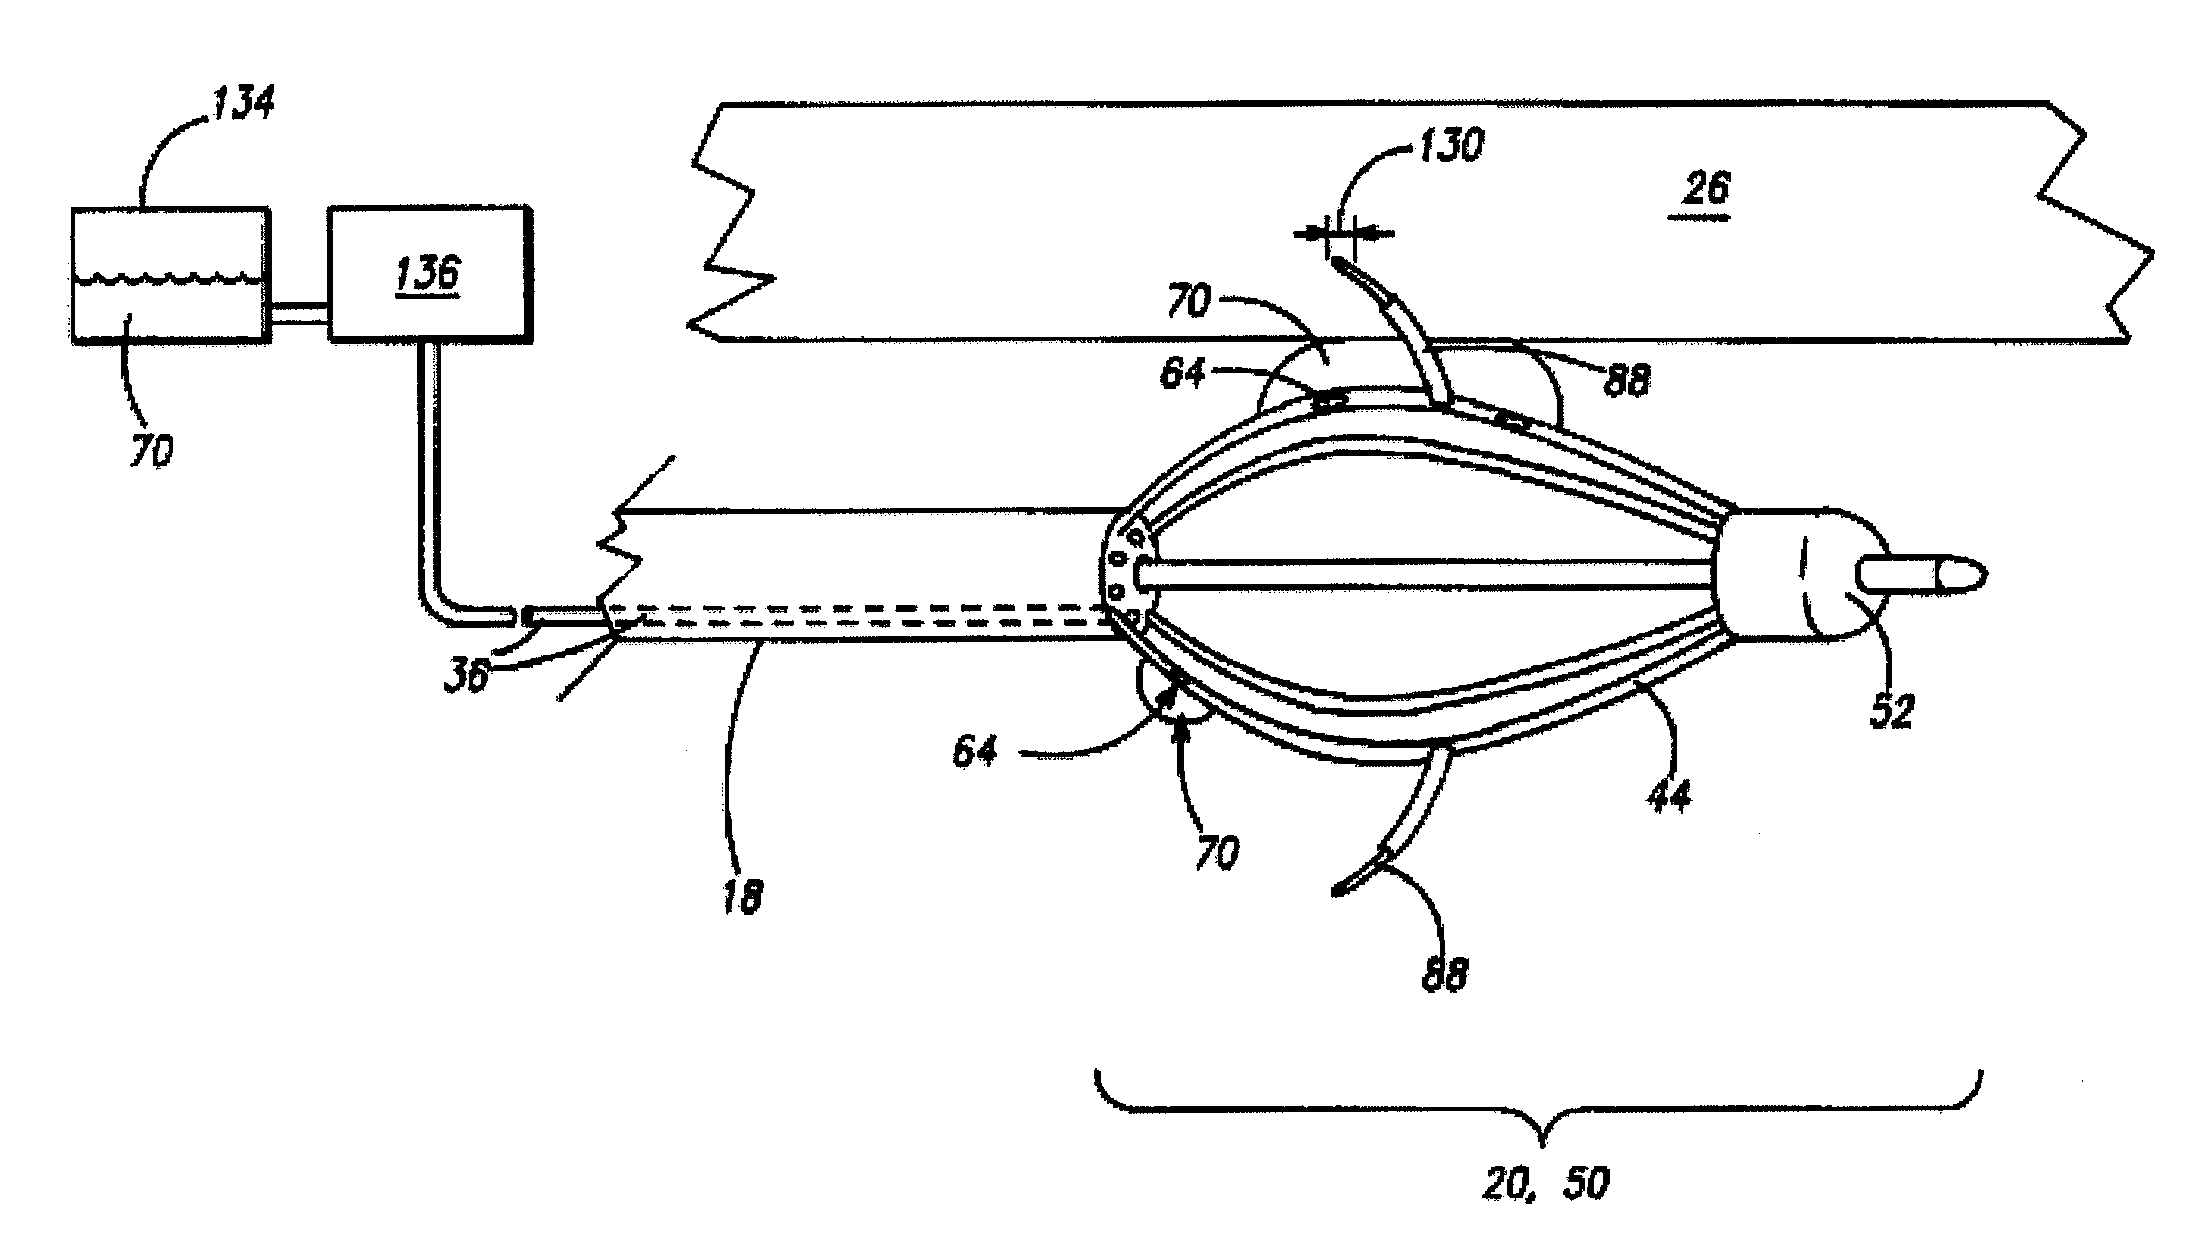 Methods and devices for treating urinary incontinence